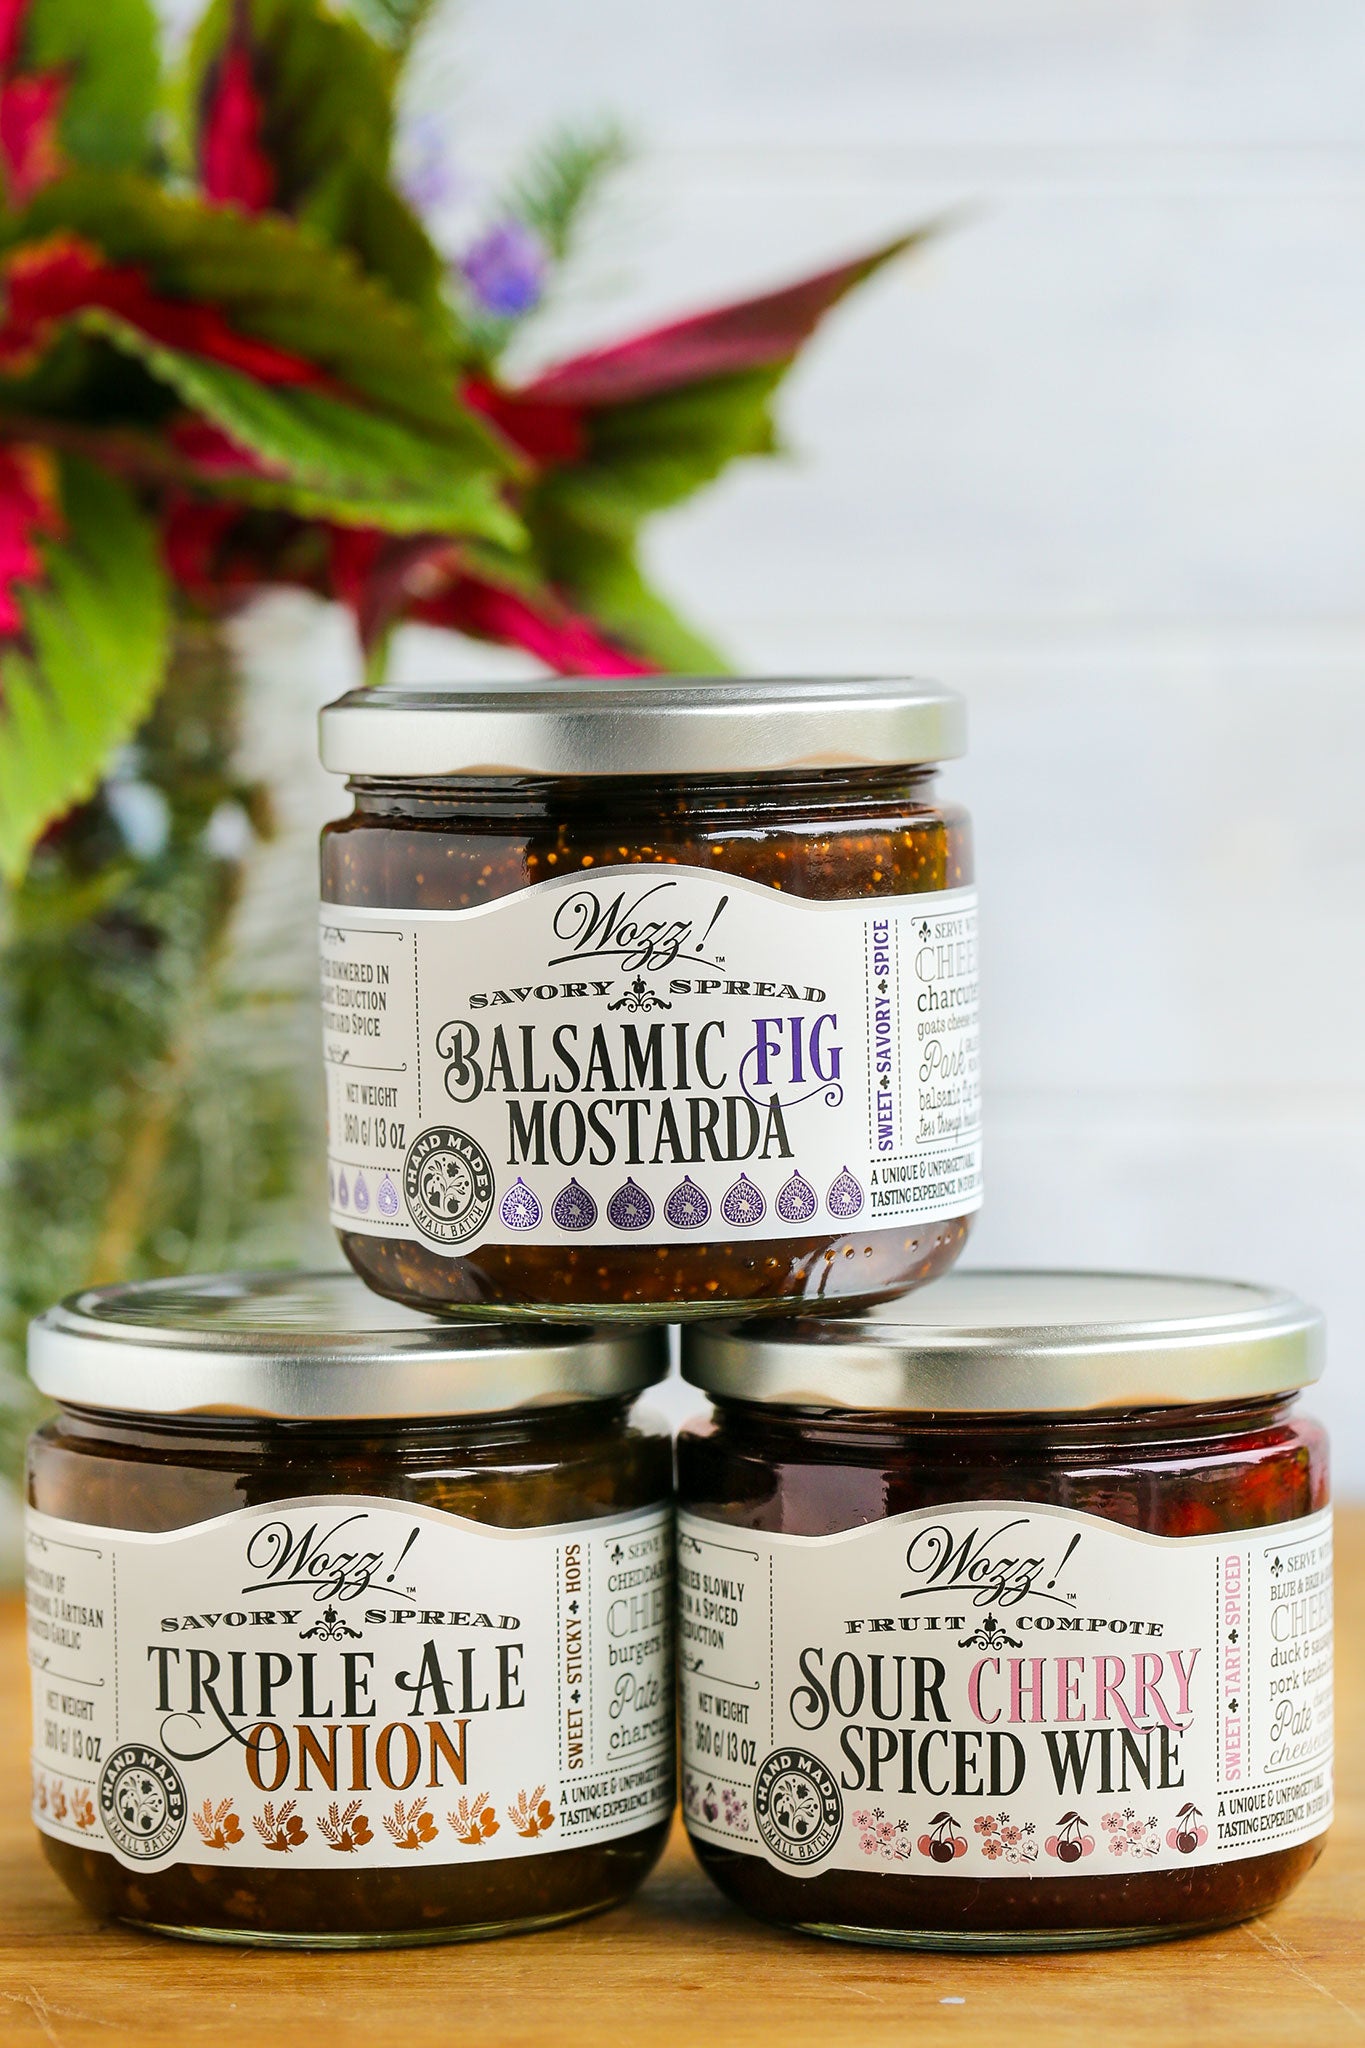 Jams For Charcuterie and Cheese Gift Set | Hostess Charcuterie Gift Set